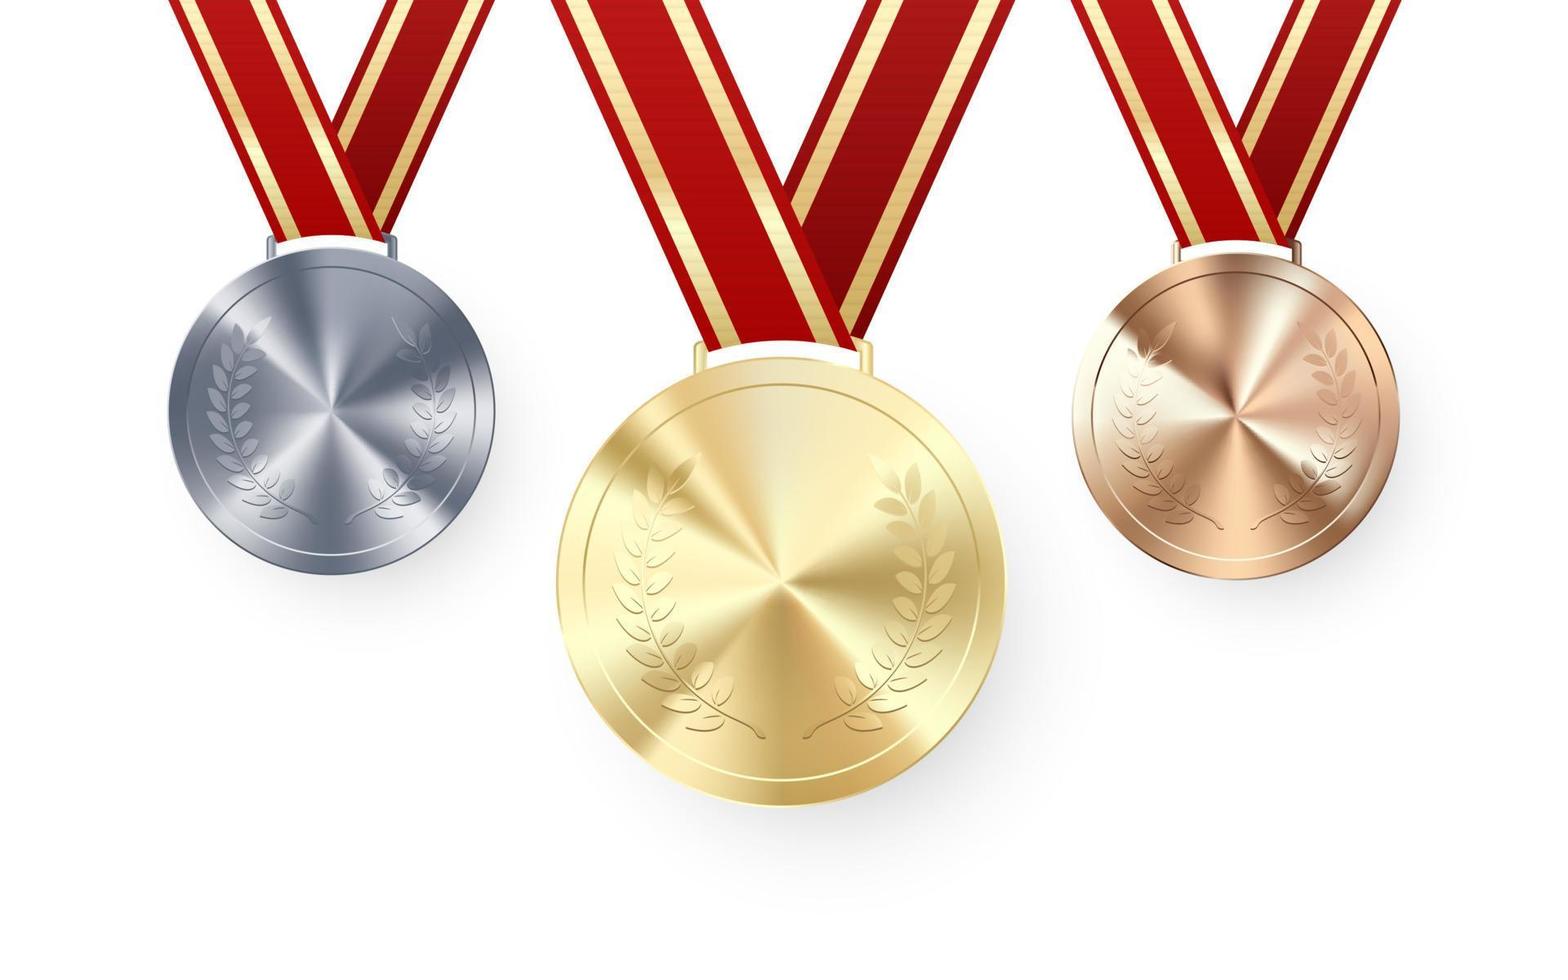 Golden Silver and Bronze medals with laurel hanging on red ribbon. Award symbol of victory and success. Vector illustration